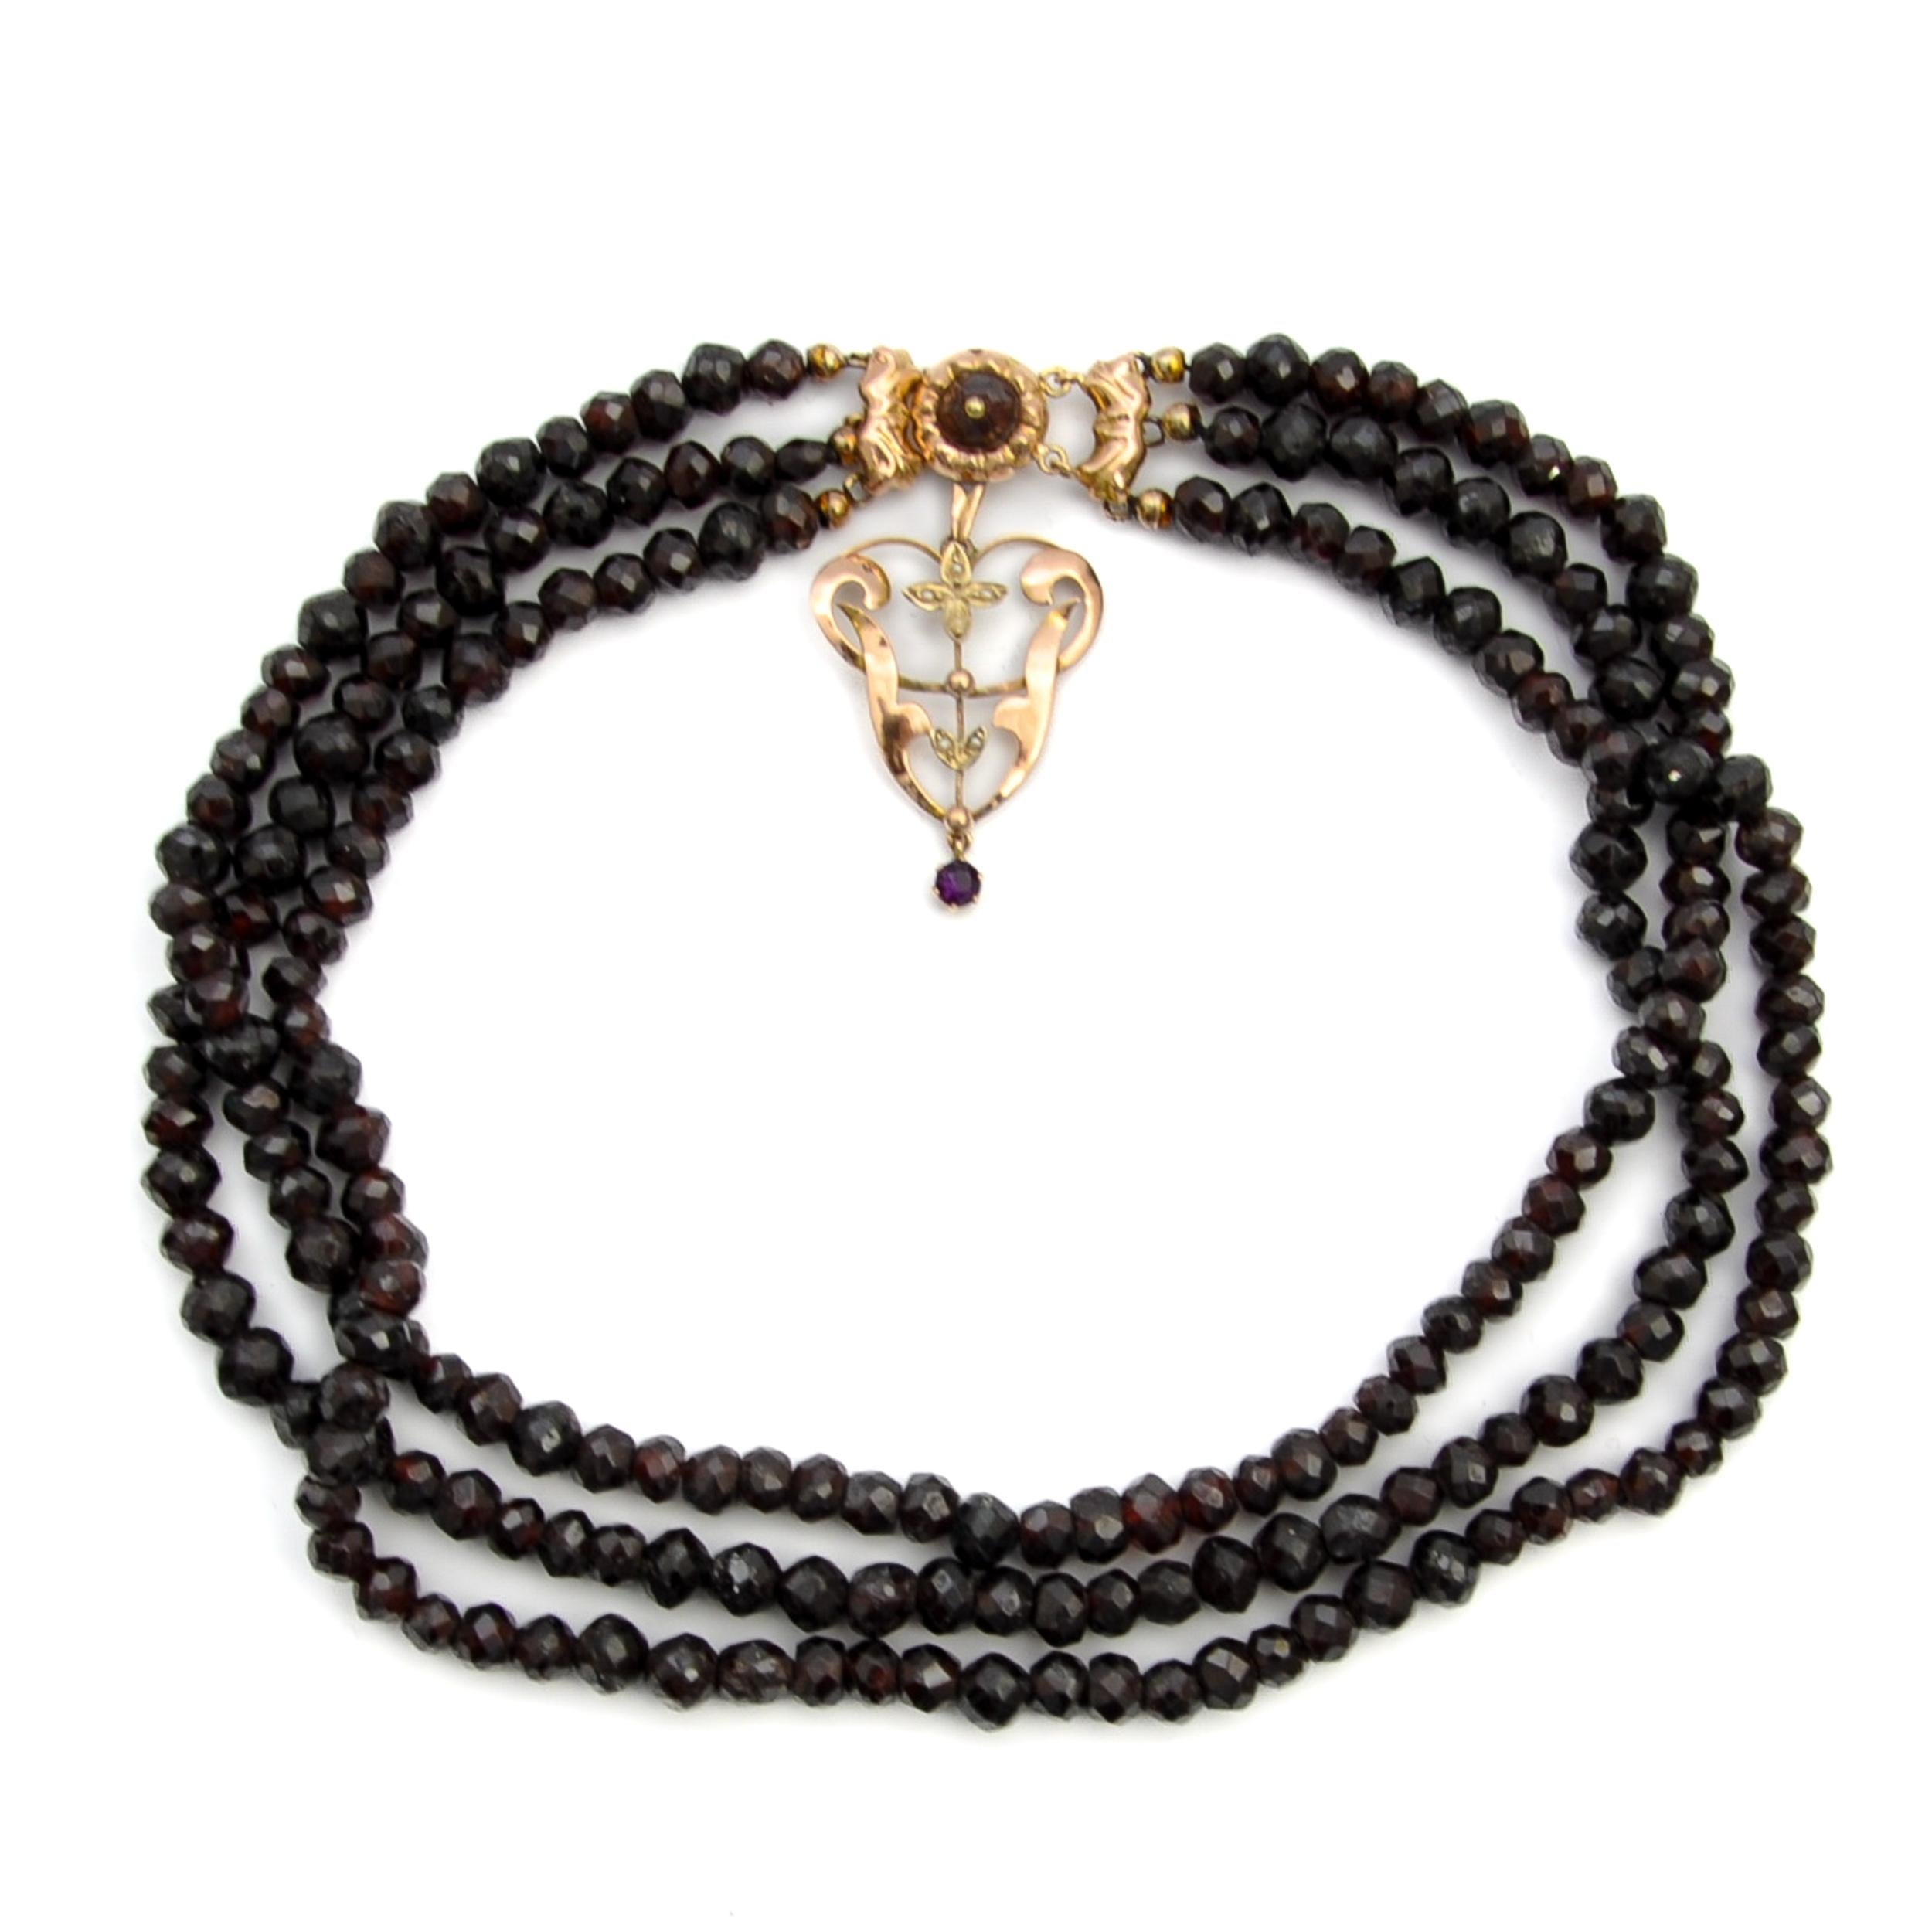 Antique 14K Gold Garnet Multi-Strand Beaded Necklace In Good Condition For Sale In Rotterdam, NL